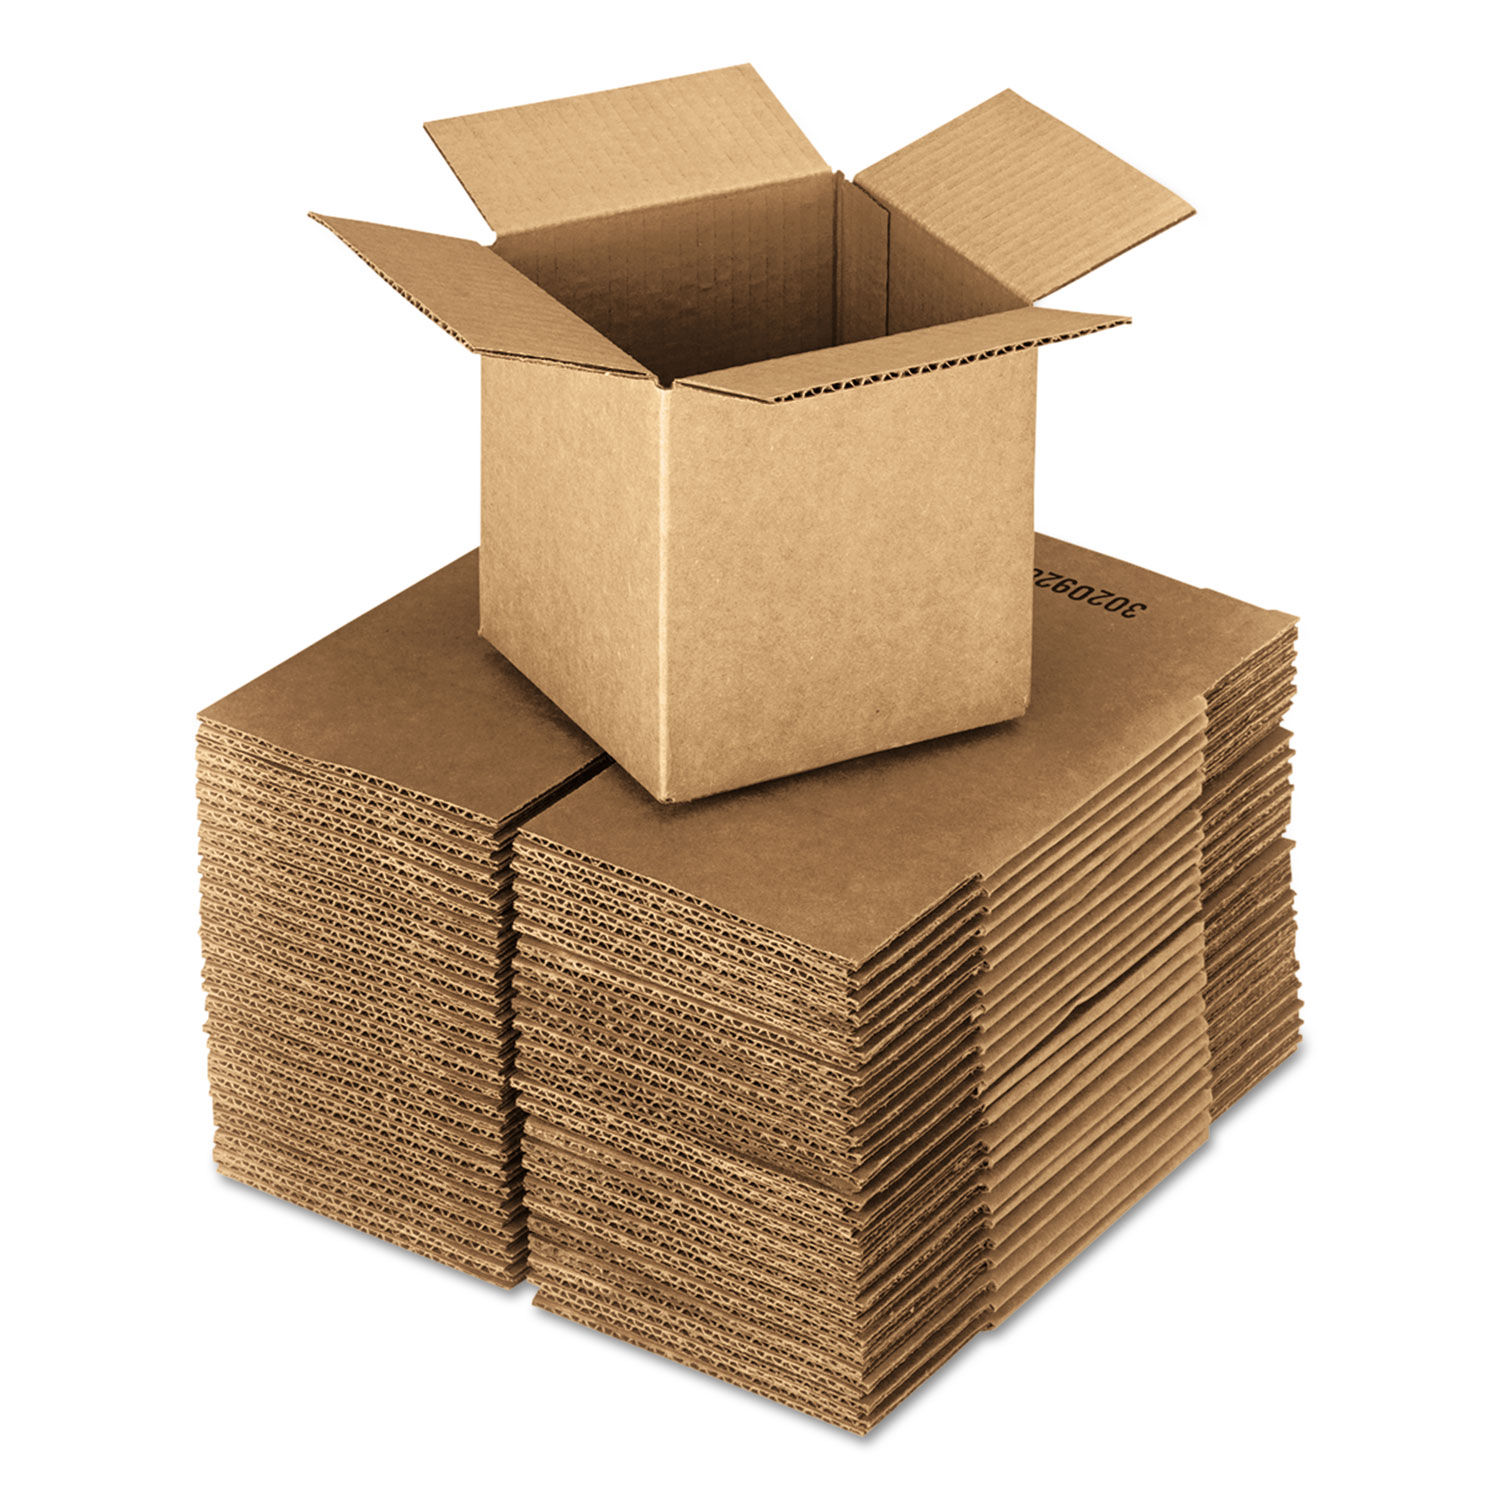 Cubed Fixed-Depth Corrugated Shipping Boxes Regular Slotted Container (RSC), 16" x 16" x 16", Brown Kraft, 25/Bundle